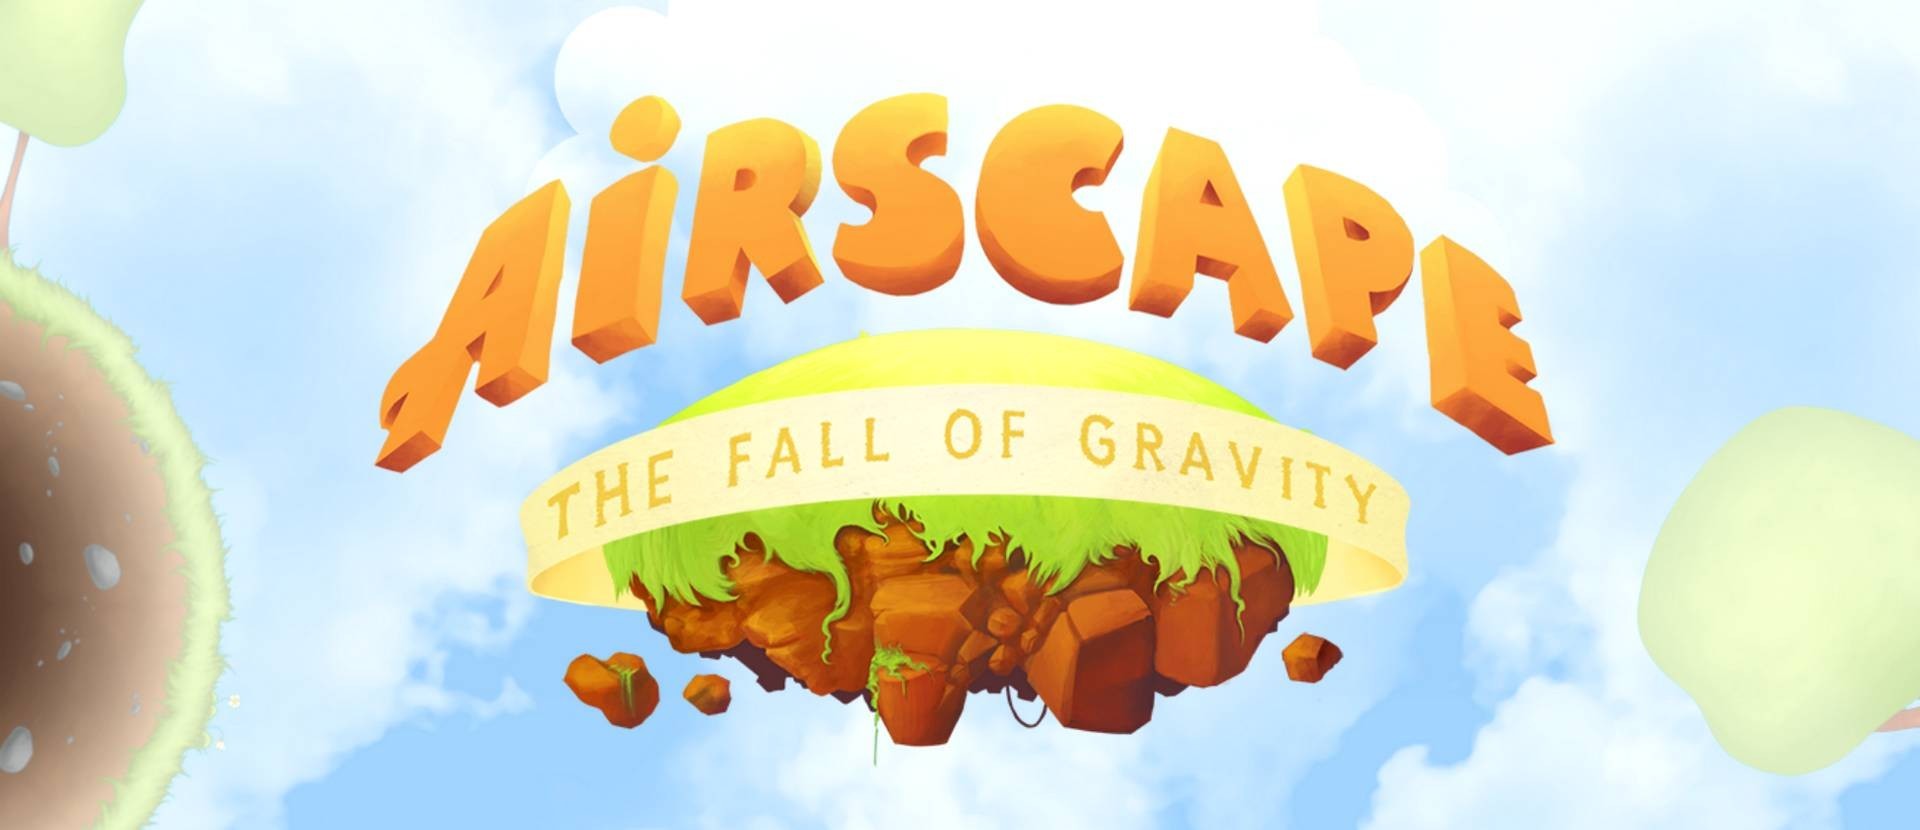 Airscape: The Fall Of Gravity - "Phi hành gia" bạch tuộc